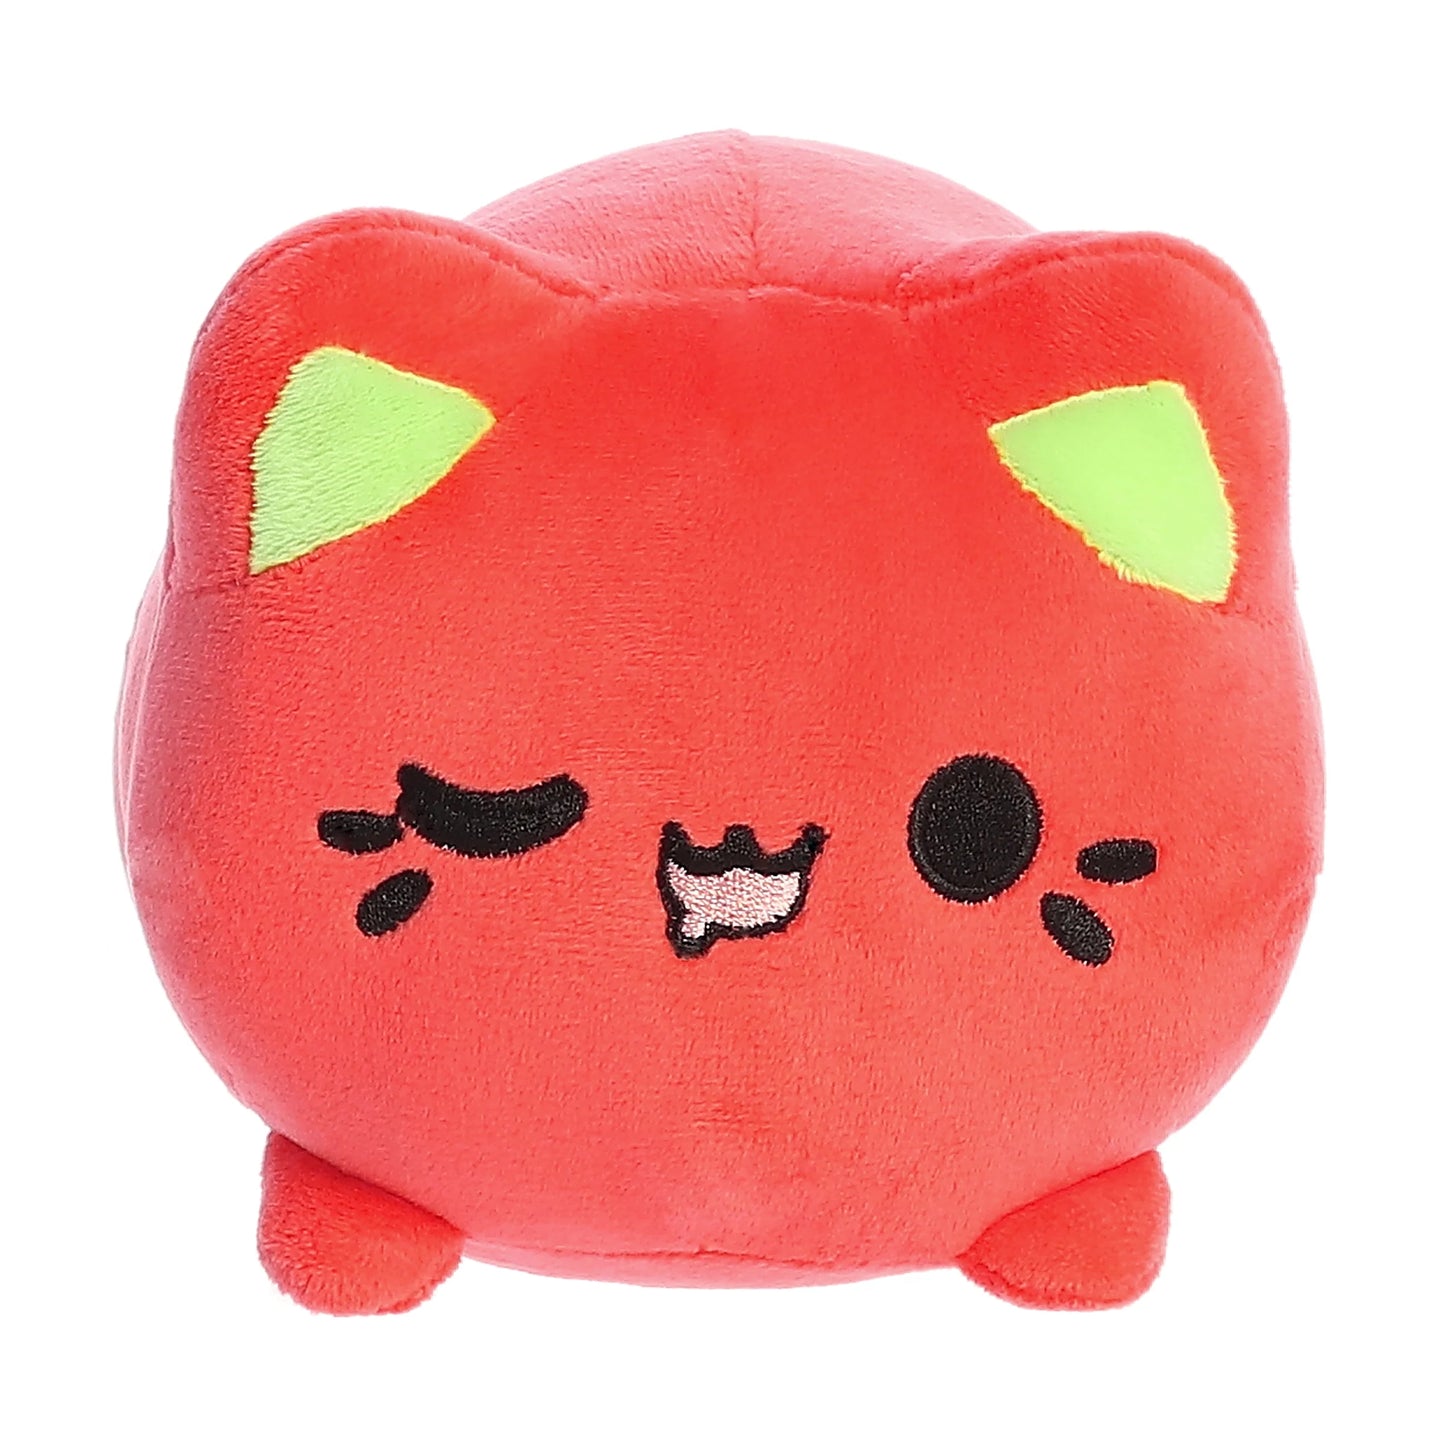 Tasty Peach is a kawaii-filled collection featuring Japanese-inspired desserts combined with adorable characters! Refreshing and sweet, this Guava Meowchi is fruit-sensation! A bright red-orange with green inner ears, this Guava Meowchi is an overstuffed mochi cat plush that has the perfect facials when you're dreaming about food.